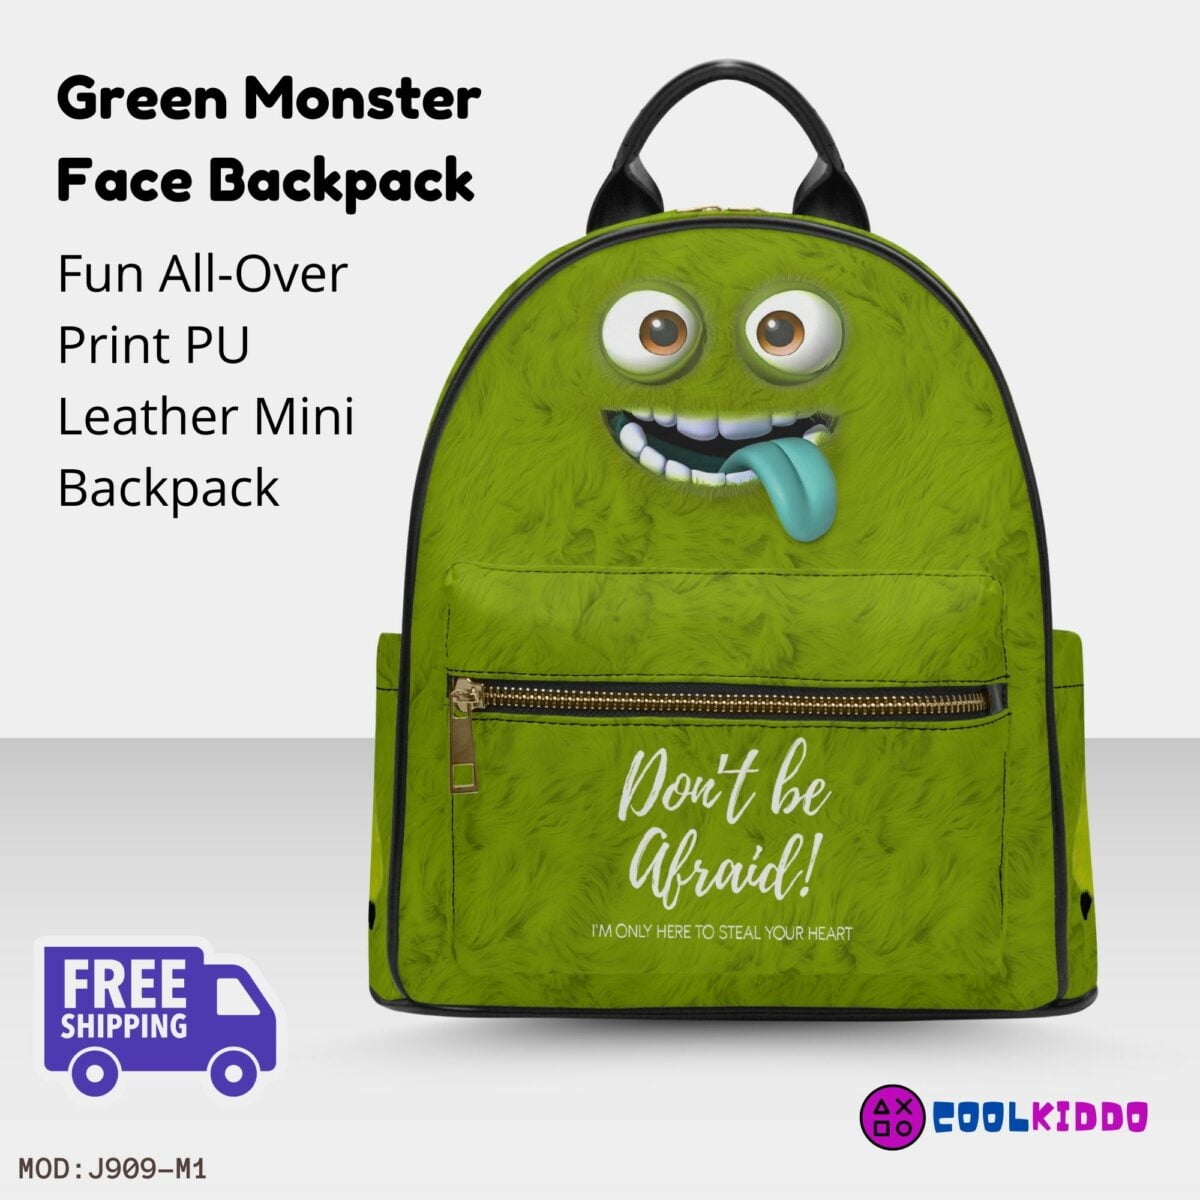 Green Monster Face Little Backpack – Flurry Simulation Fun All-Over Print Leather Street Bag For Girls Cool Kiddo 14